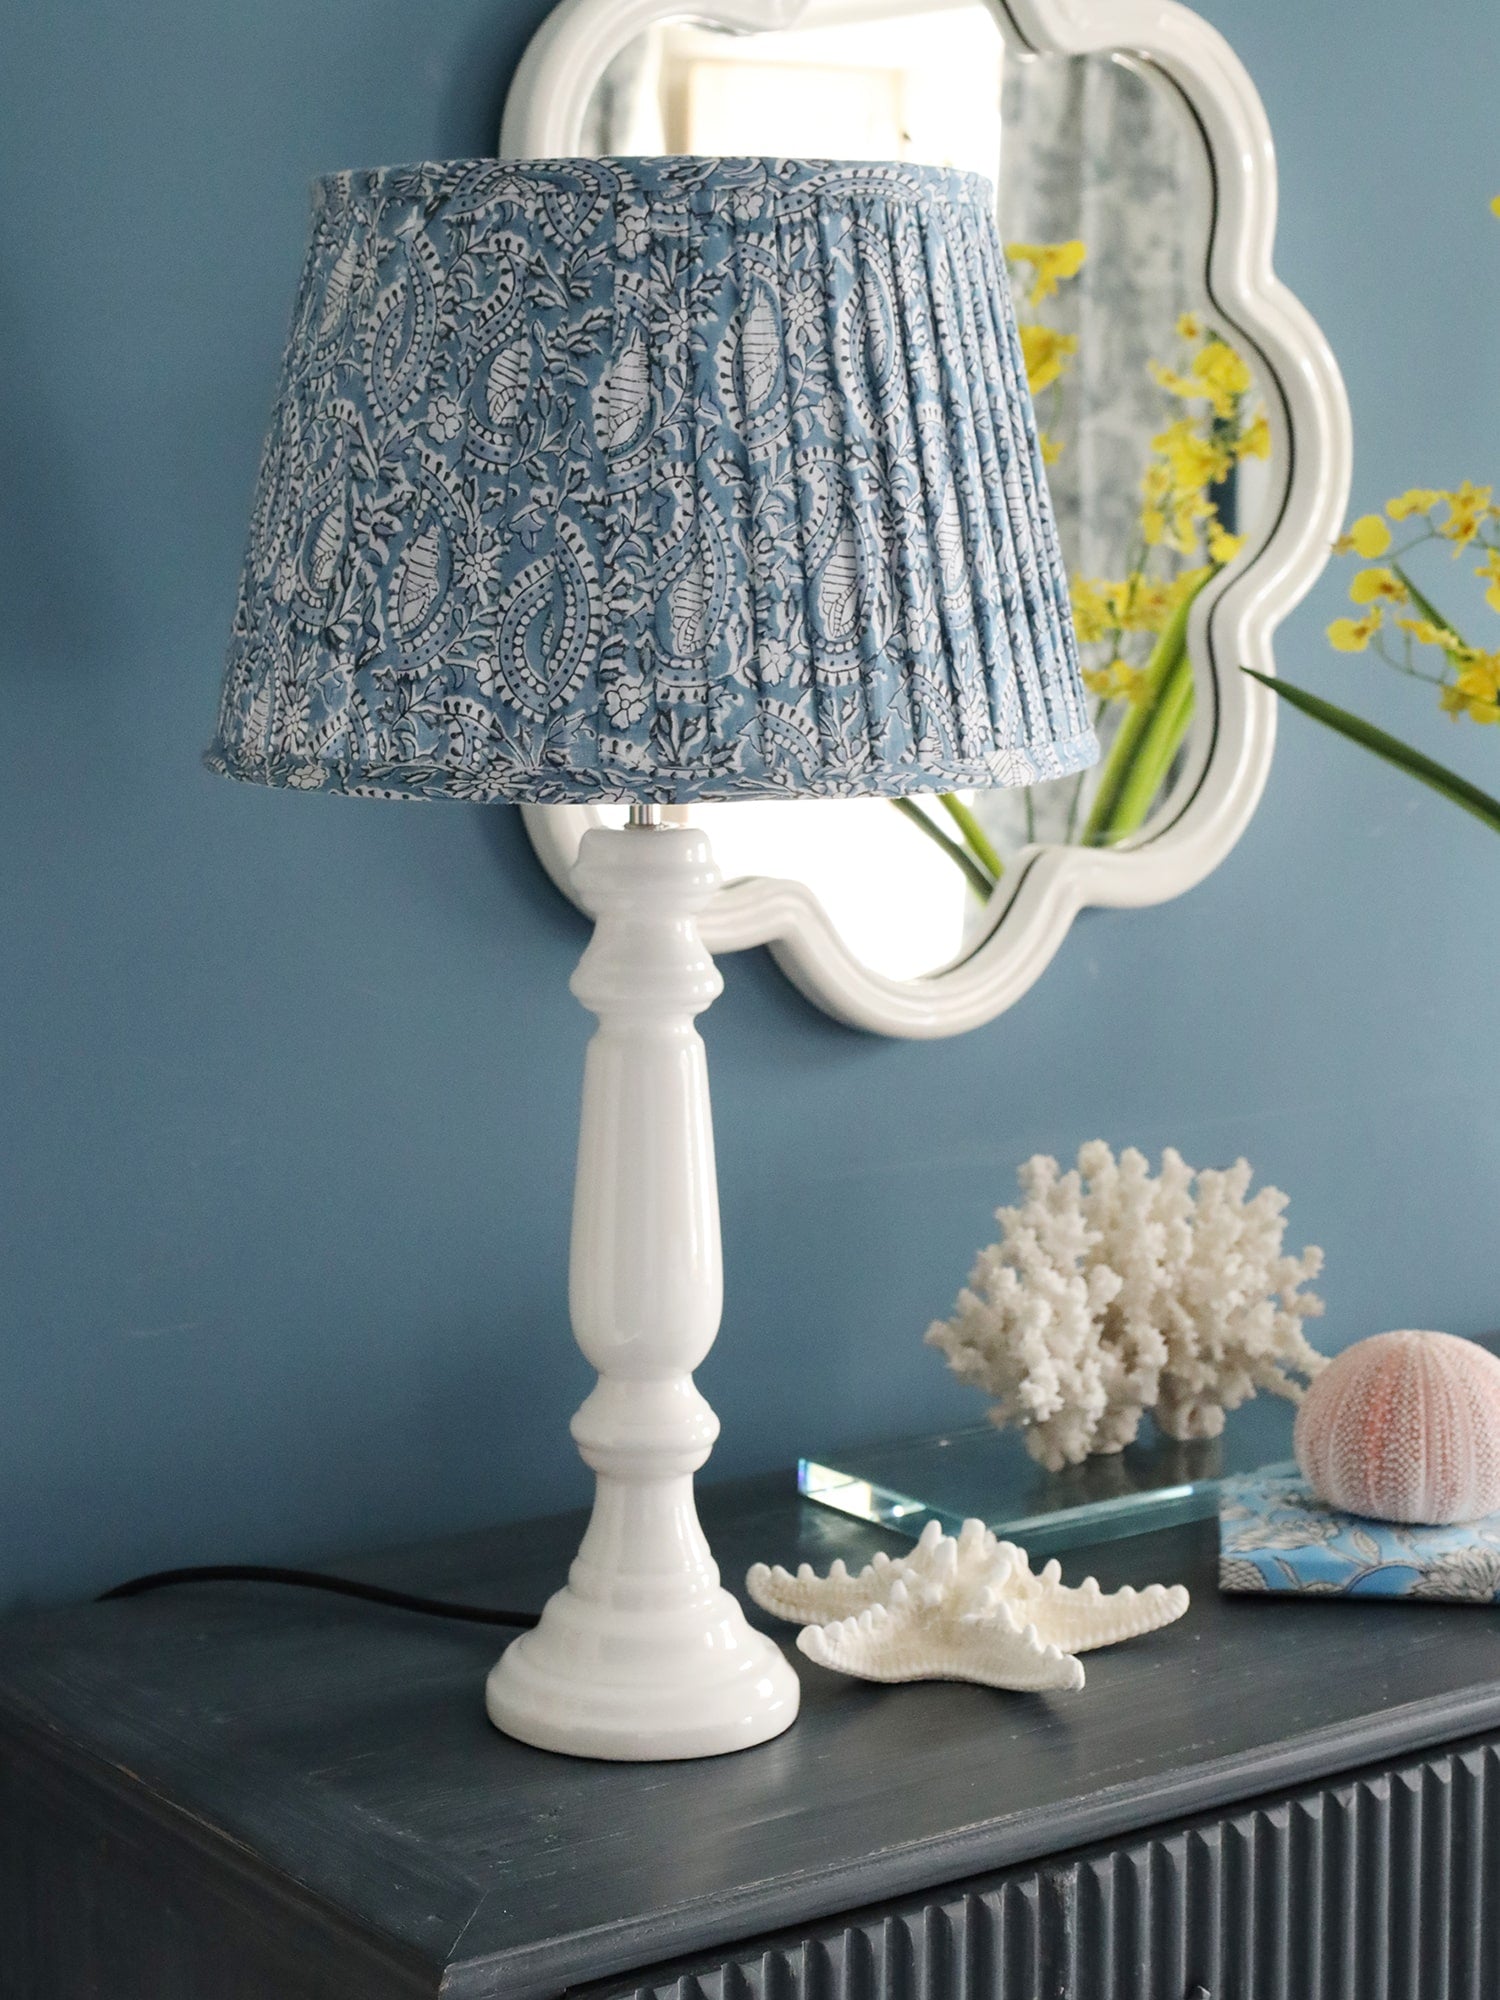 Azure paisley pleated lampshade on a wood white zennor lampbase on a sideboard.Also on the sideboard are many shells and in the background on the wall is a white wave mirror